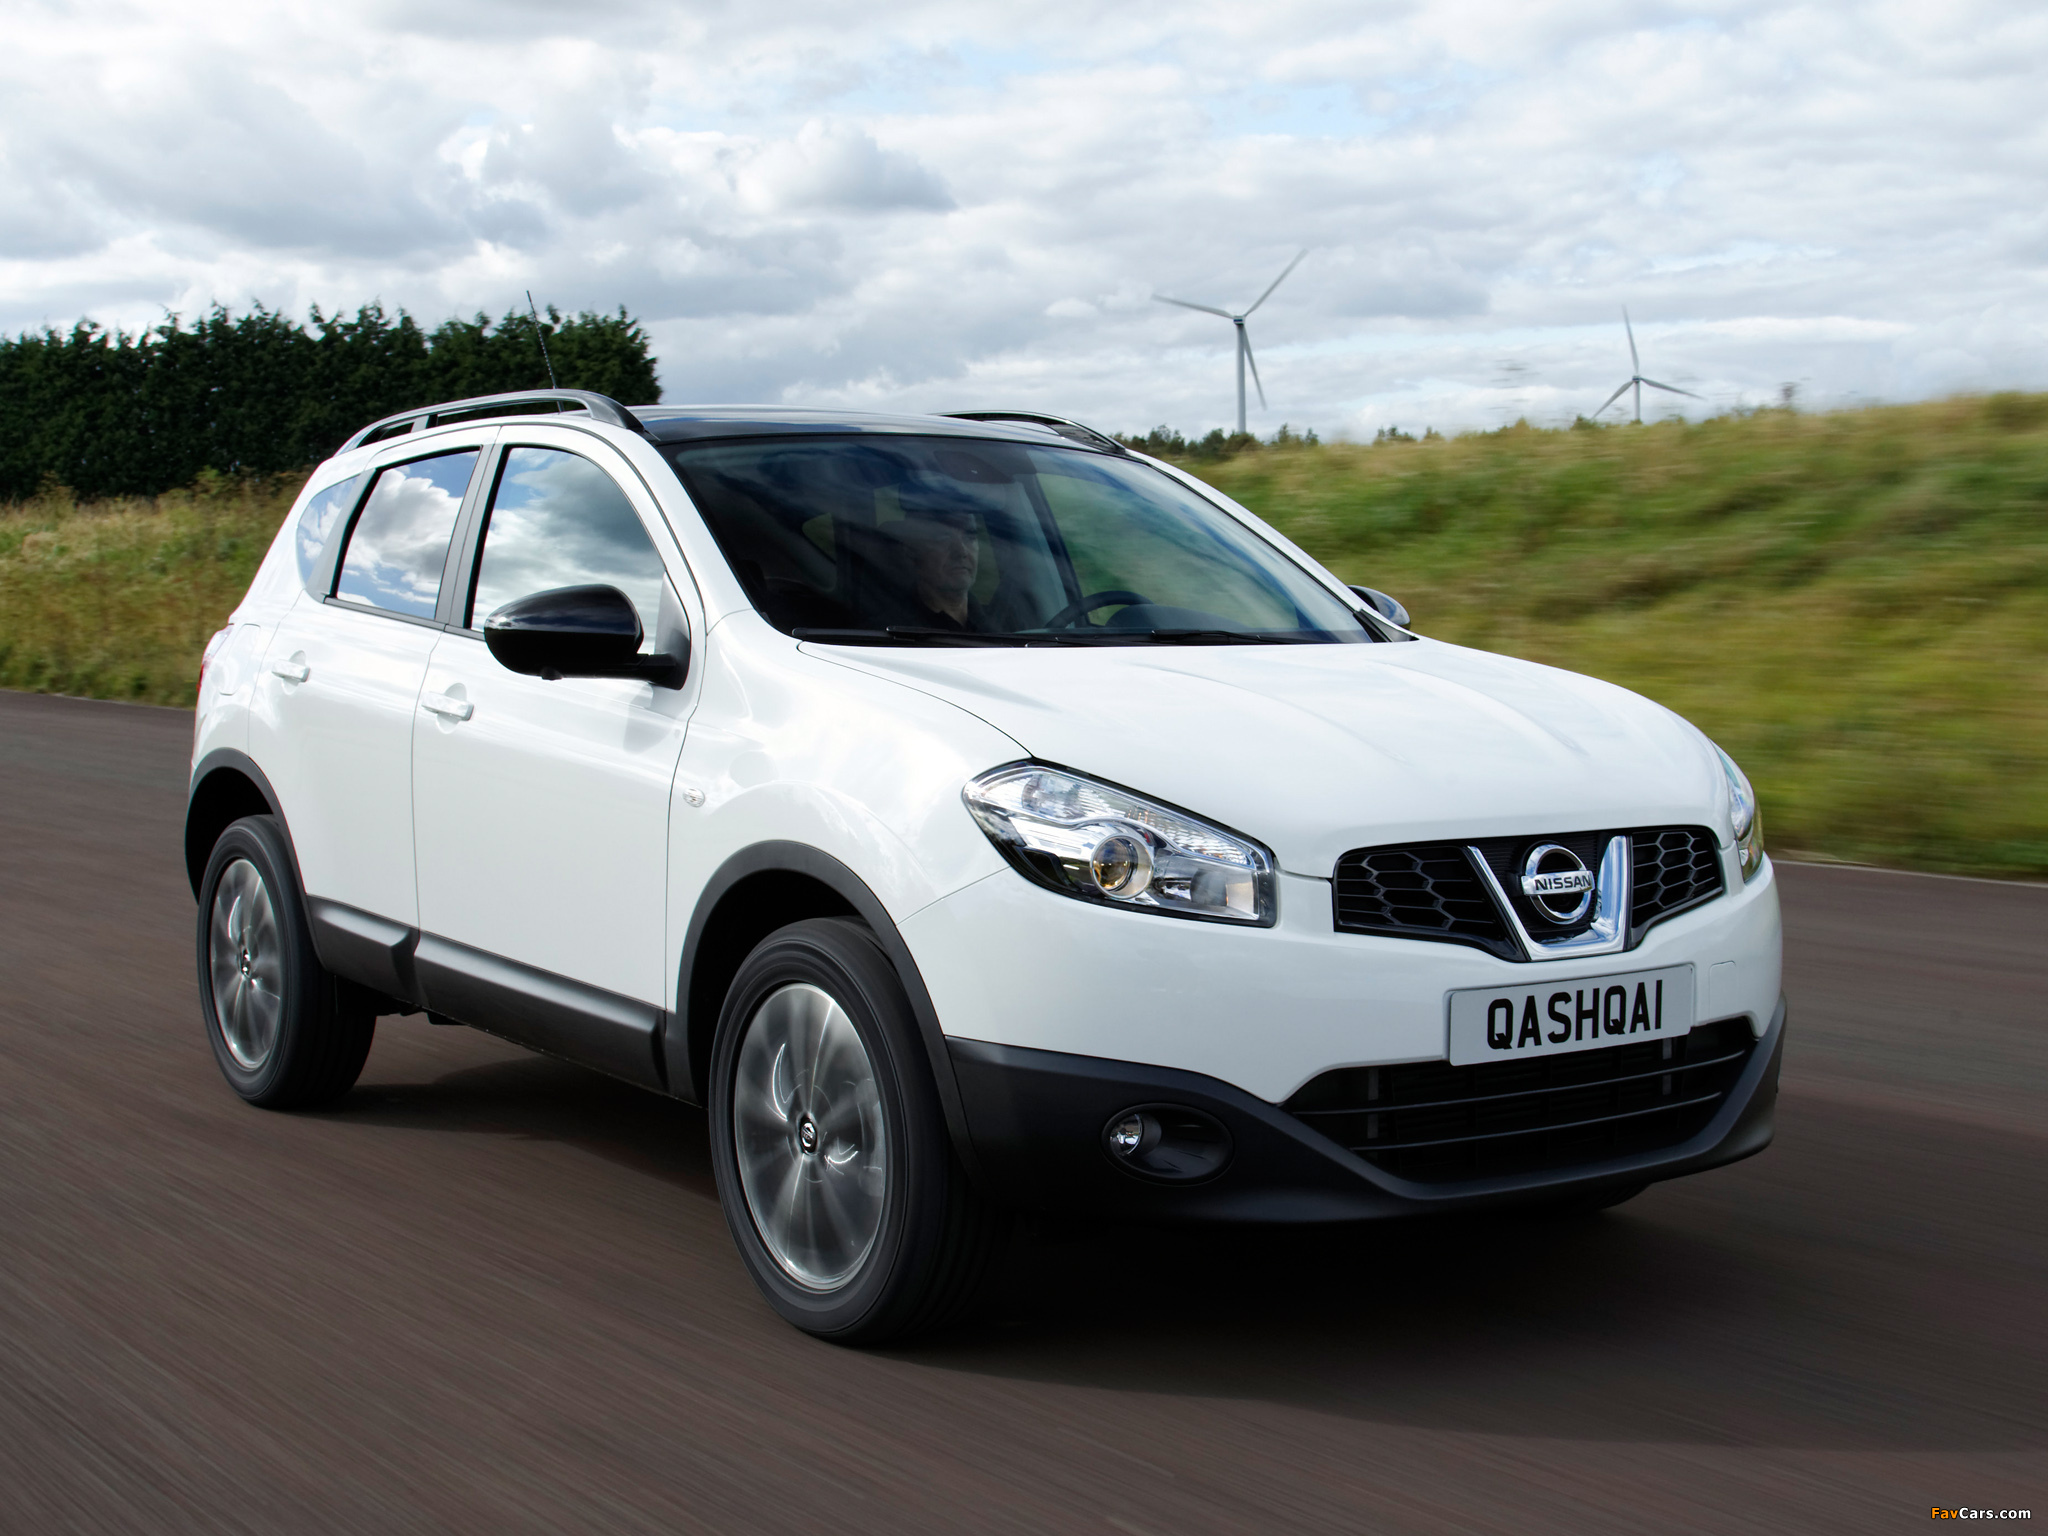 Pictures of Nissan Qashqai 360 2012 (2048x1536)